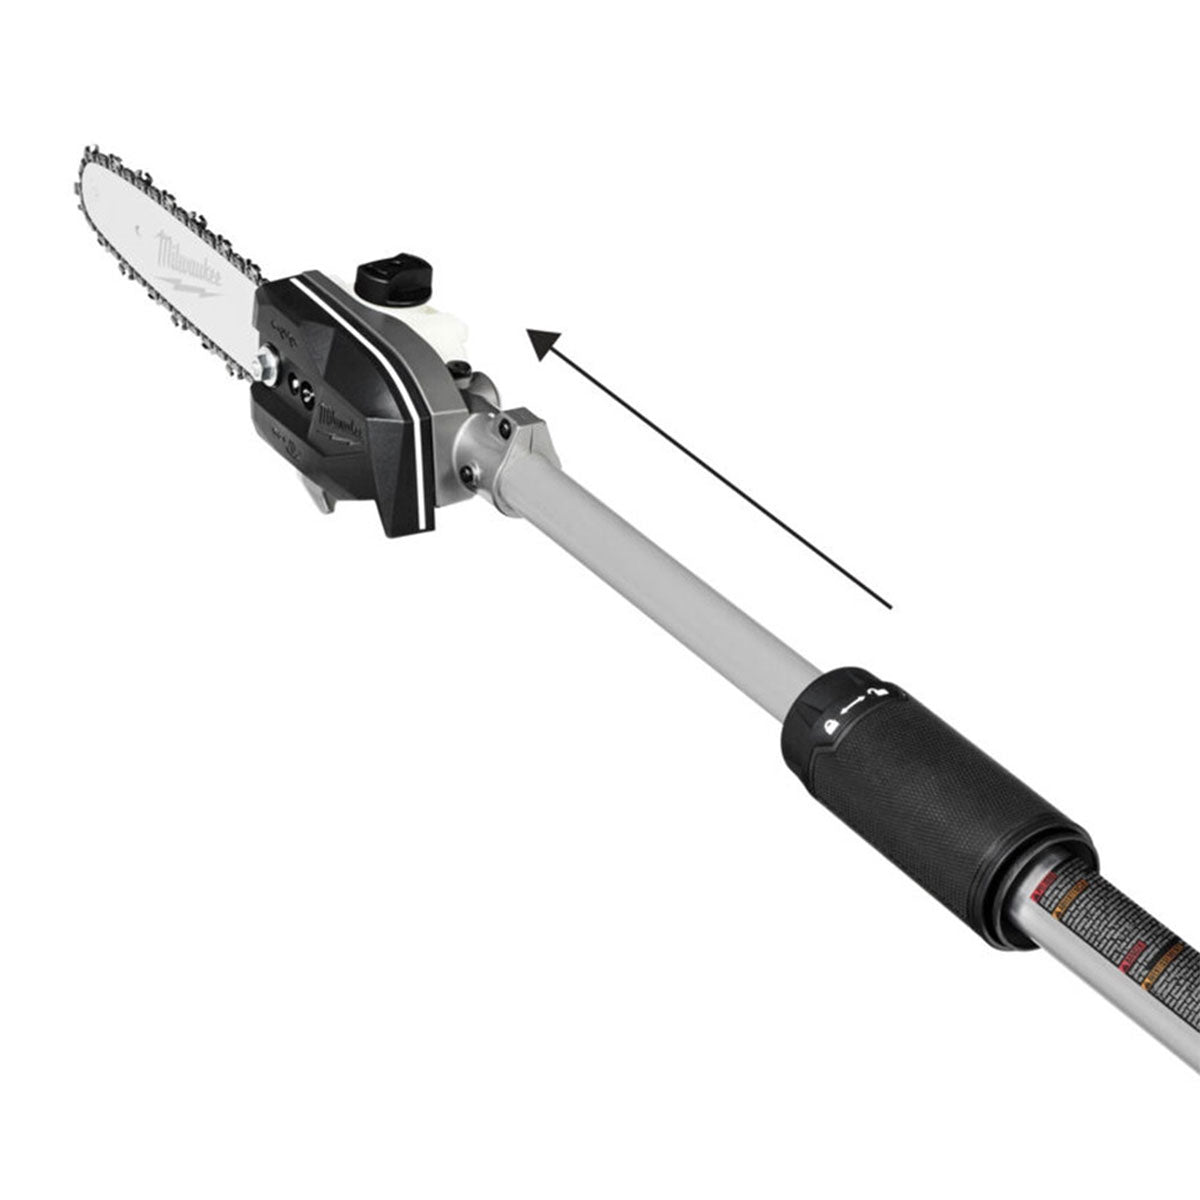 Milwaukee M18FTPS30-121 18V FUEL Brushless 30cm Telescopic Pole Saw with 1 x 12.0Ah Battery & Charger 4933480870